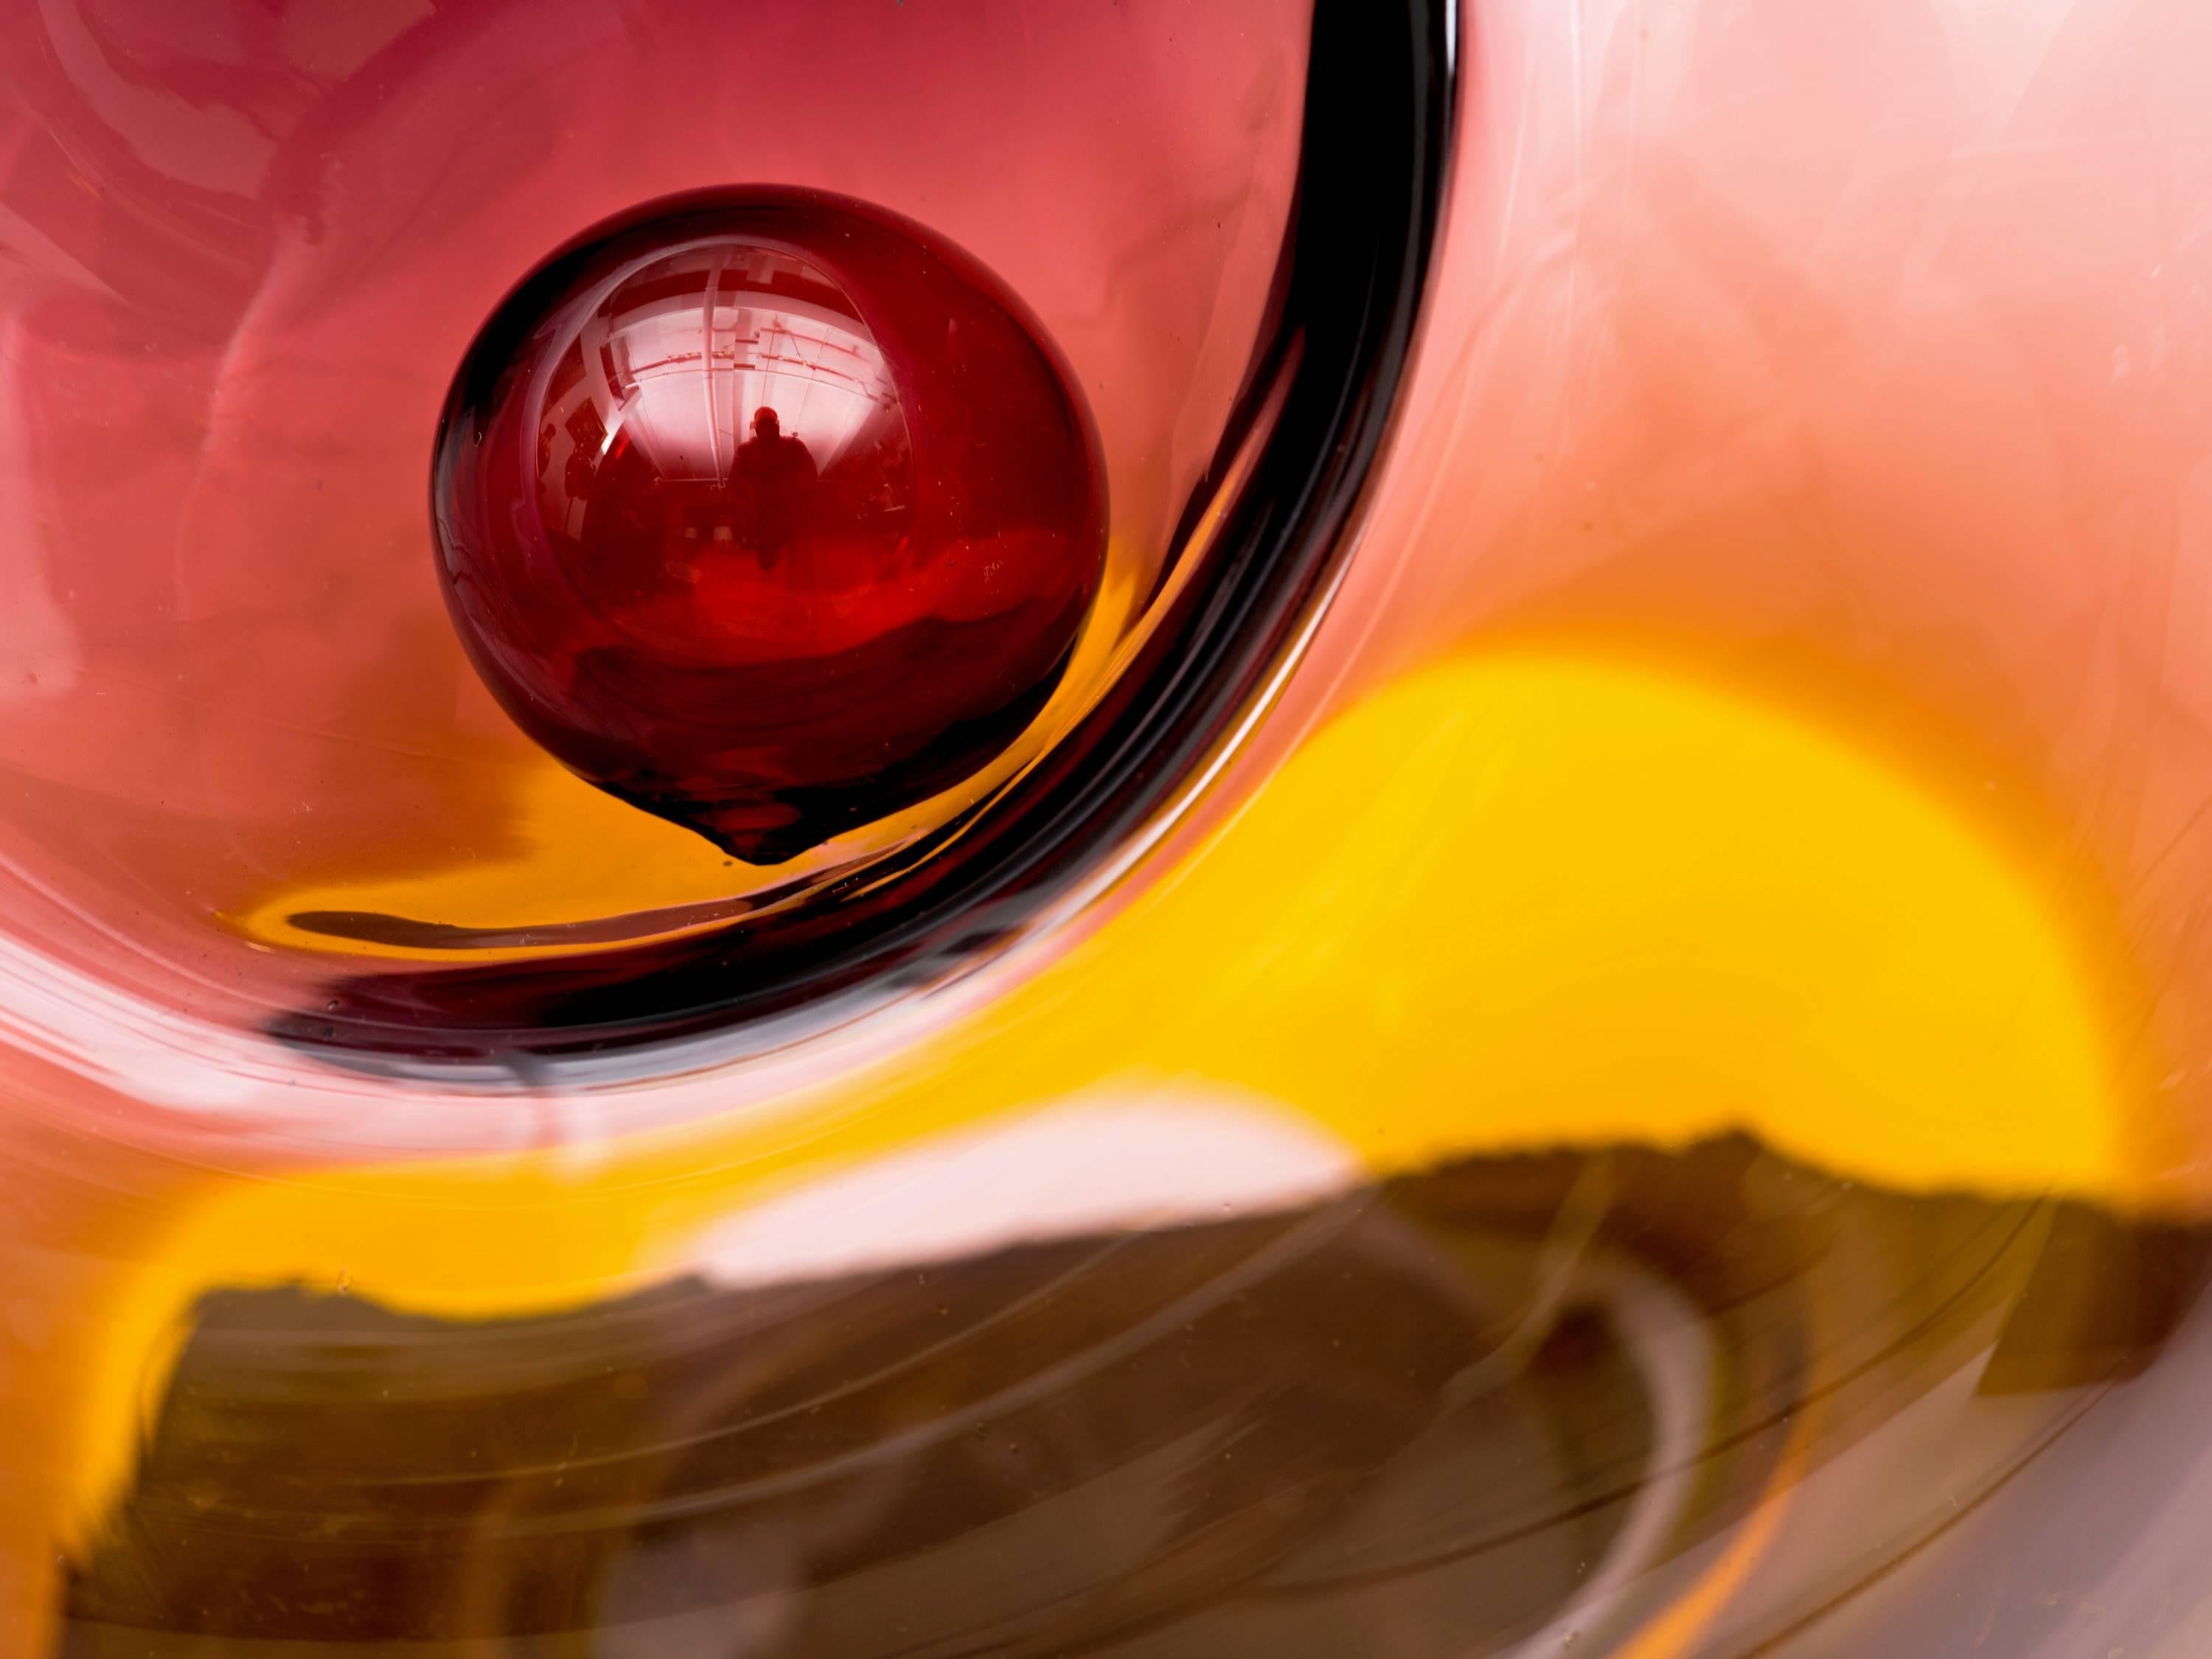 Extraordinary Massive blown glass sculpture with two recessed areas for balls by Czech Artist Jirina Zertova, circa 1974. Exceptional statement piece in colors ranging from cranberry red to darker shades of red in the balls to a splash of gold at